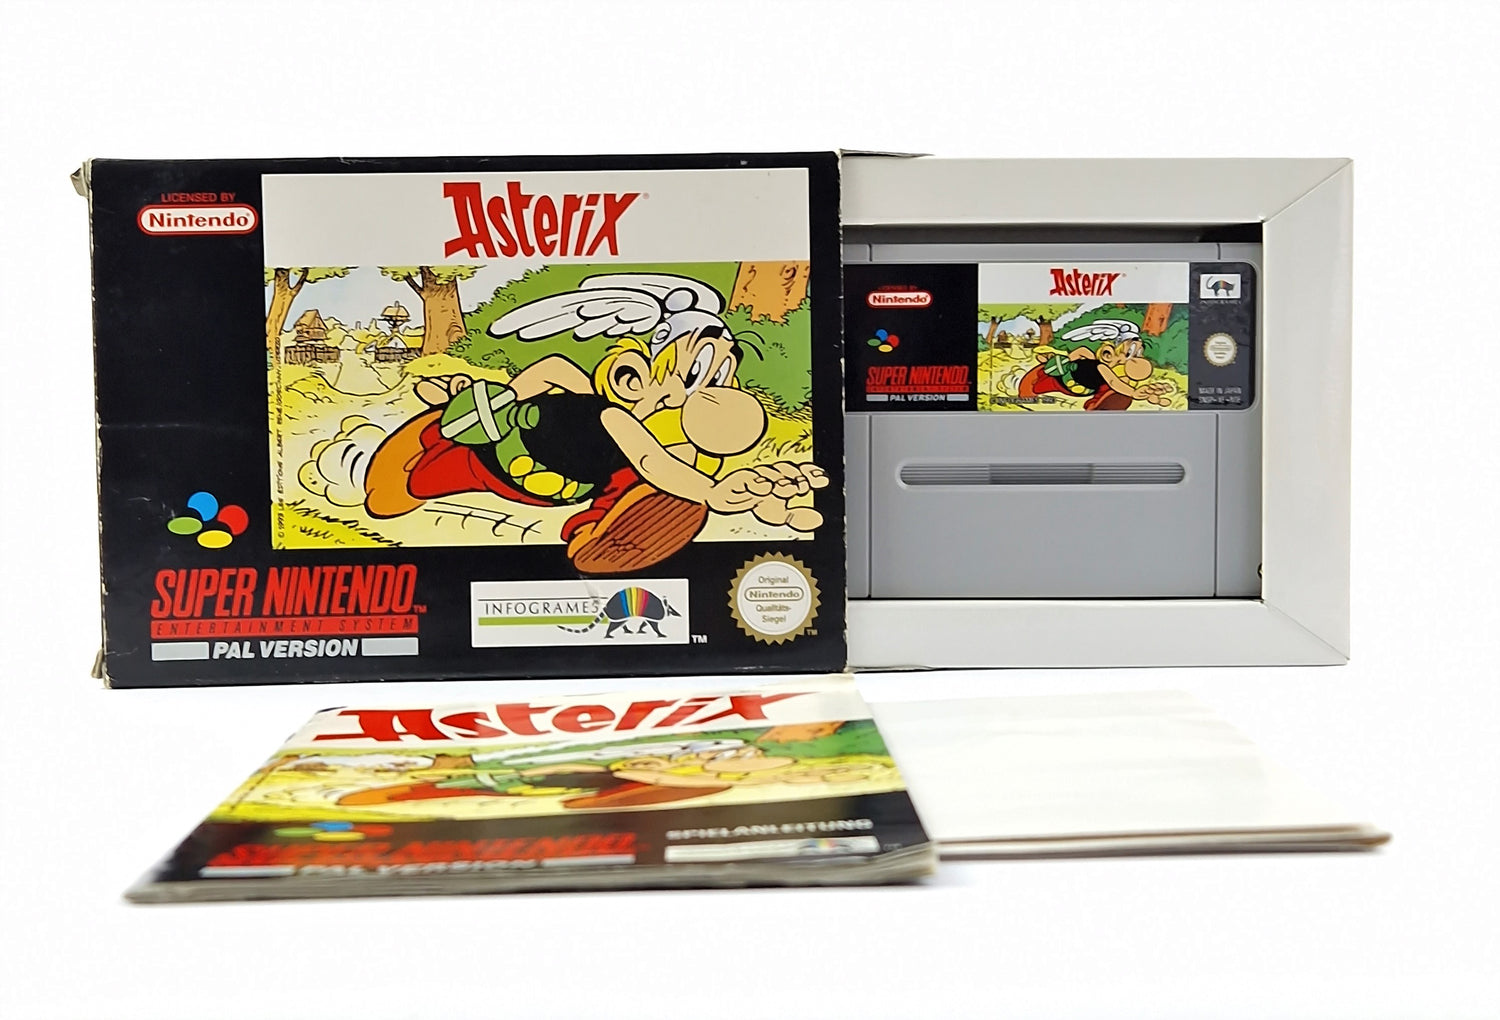 Super Nintendo game: Asterix with poster - original packaging instructions module Snes Pal Game